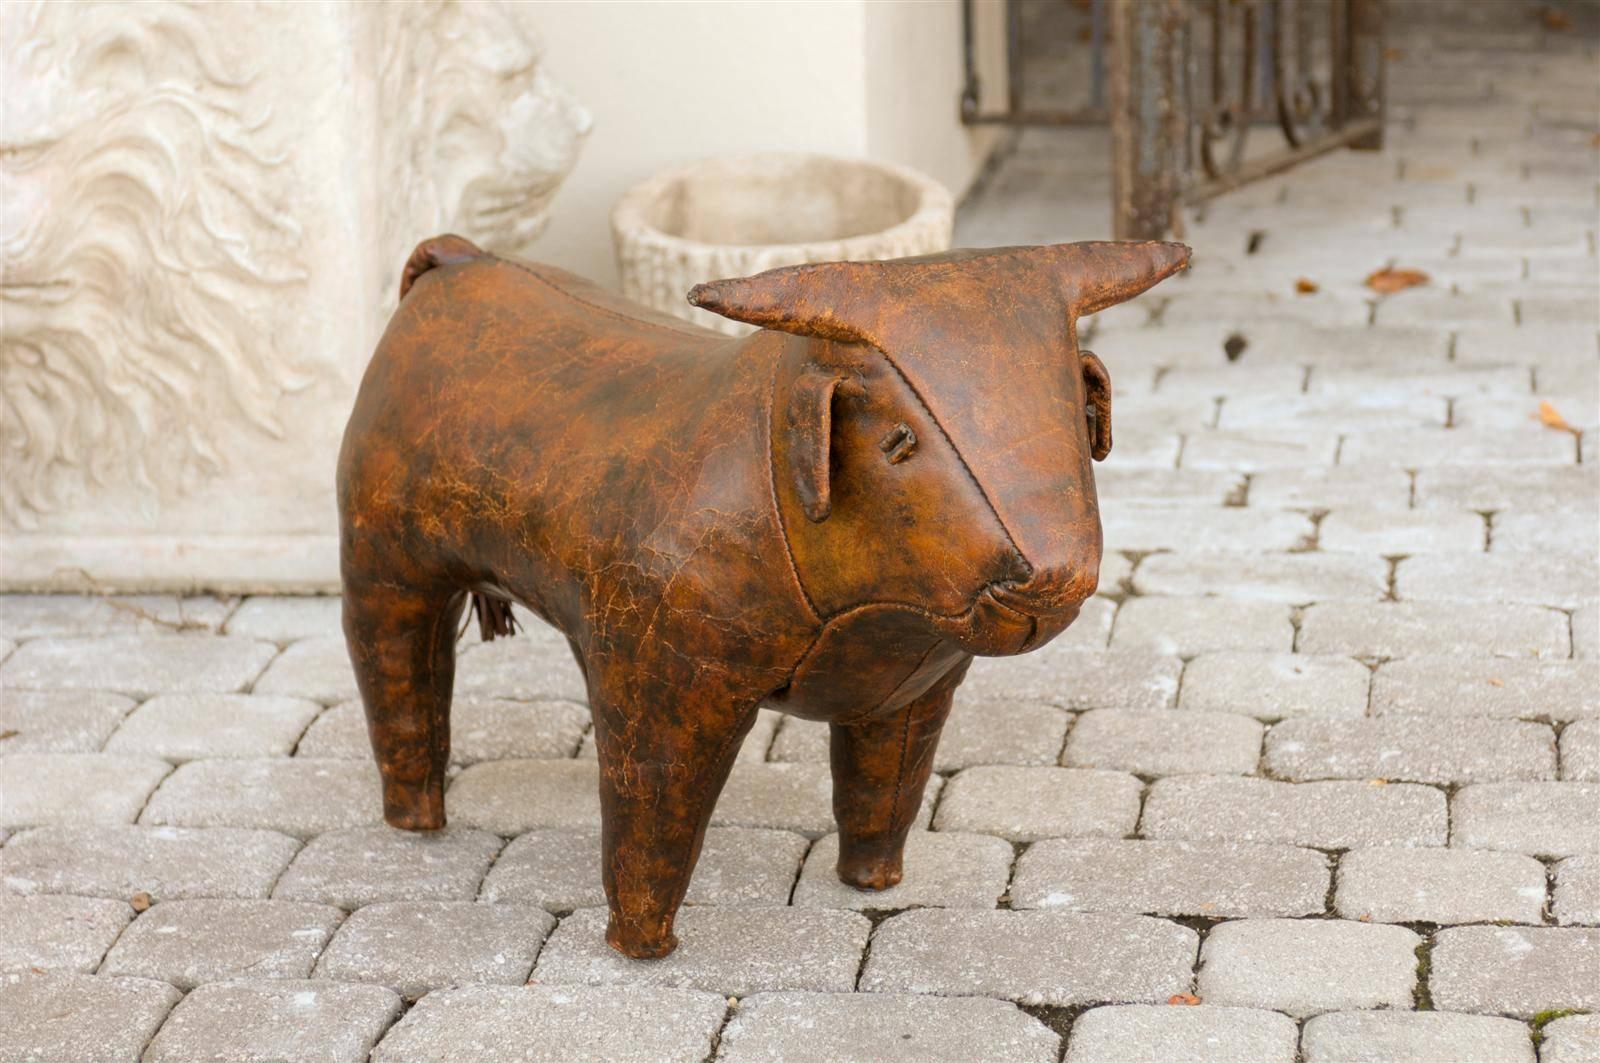 An English vintage bull leather foot stool. This exquisite English foot stool from circa 1960 features a small bull with straight horns. This sturdy four legged prize communicates strength and is made of stitched brown leather. Although a tremendous